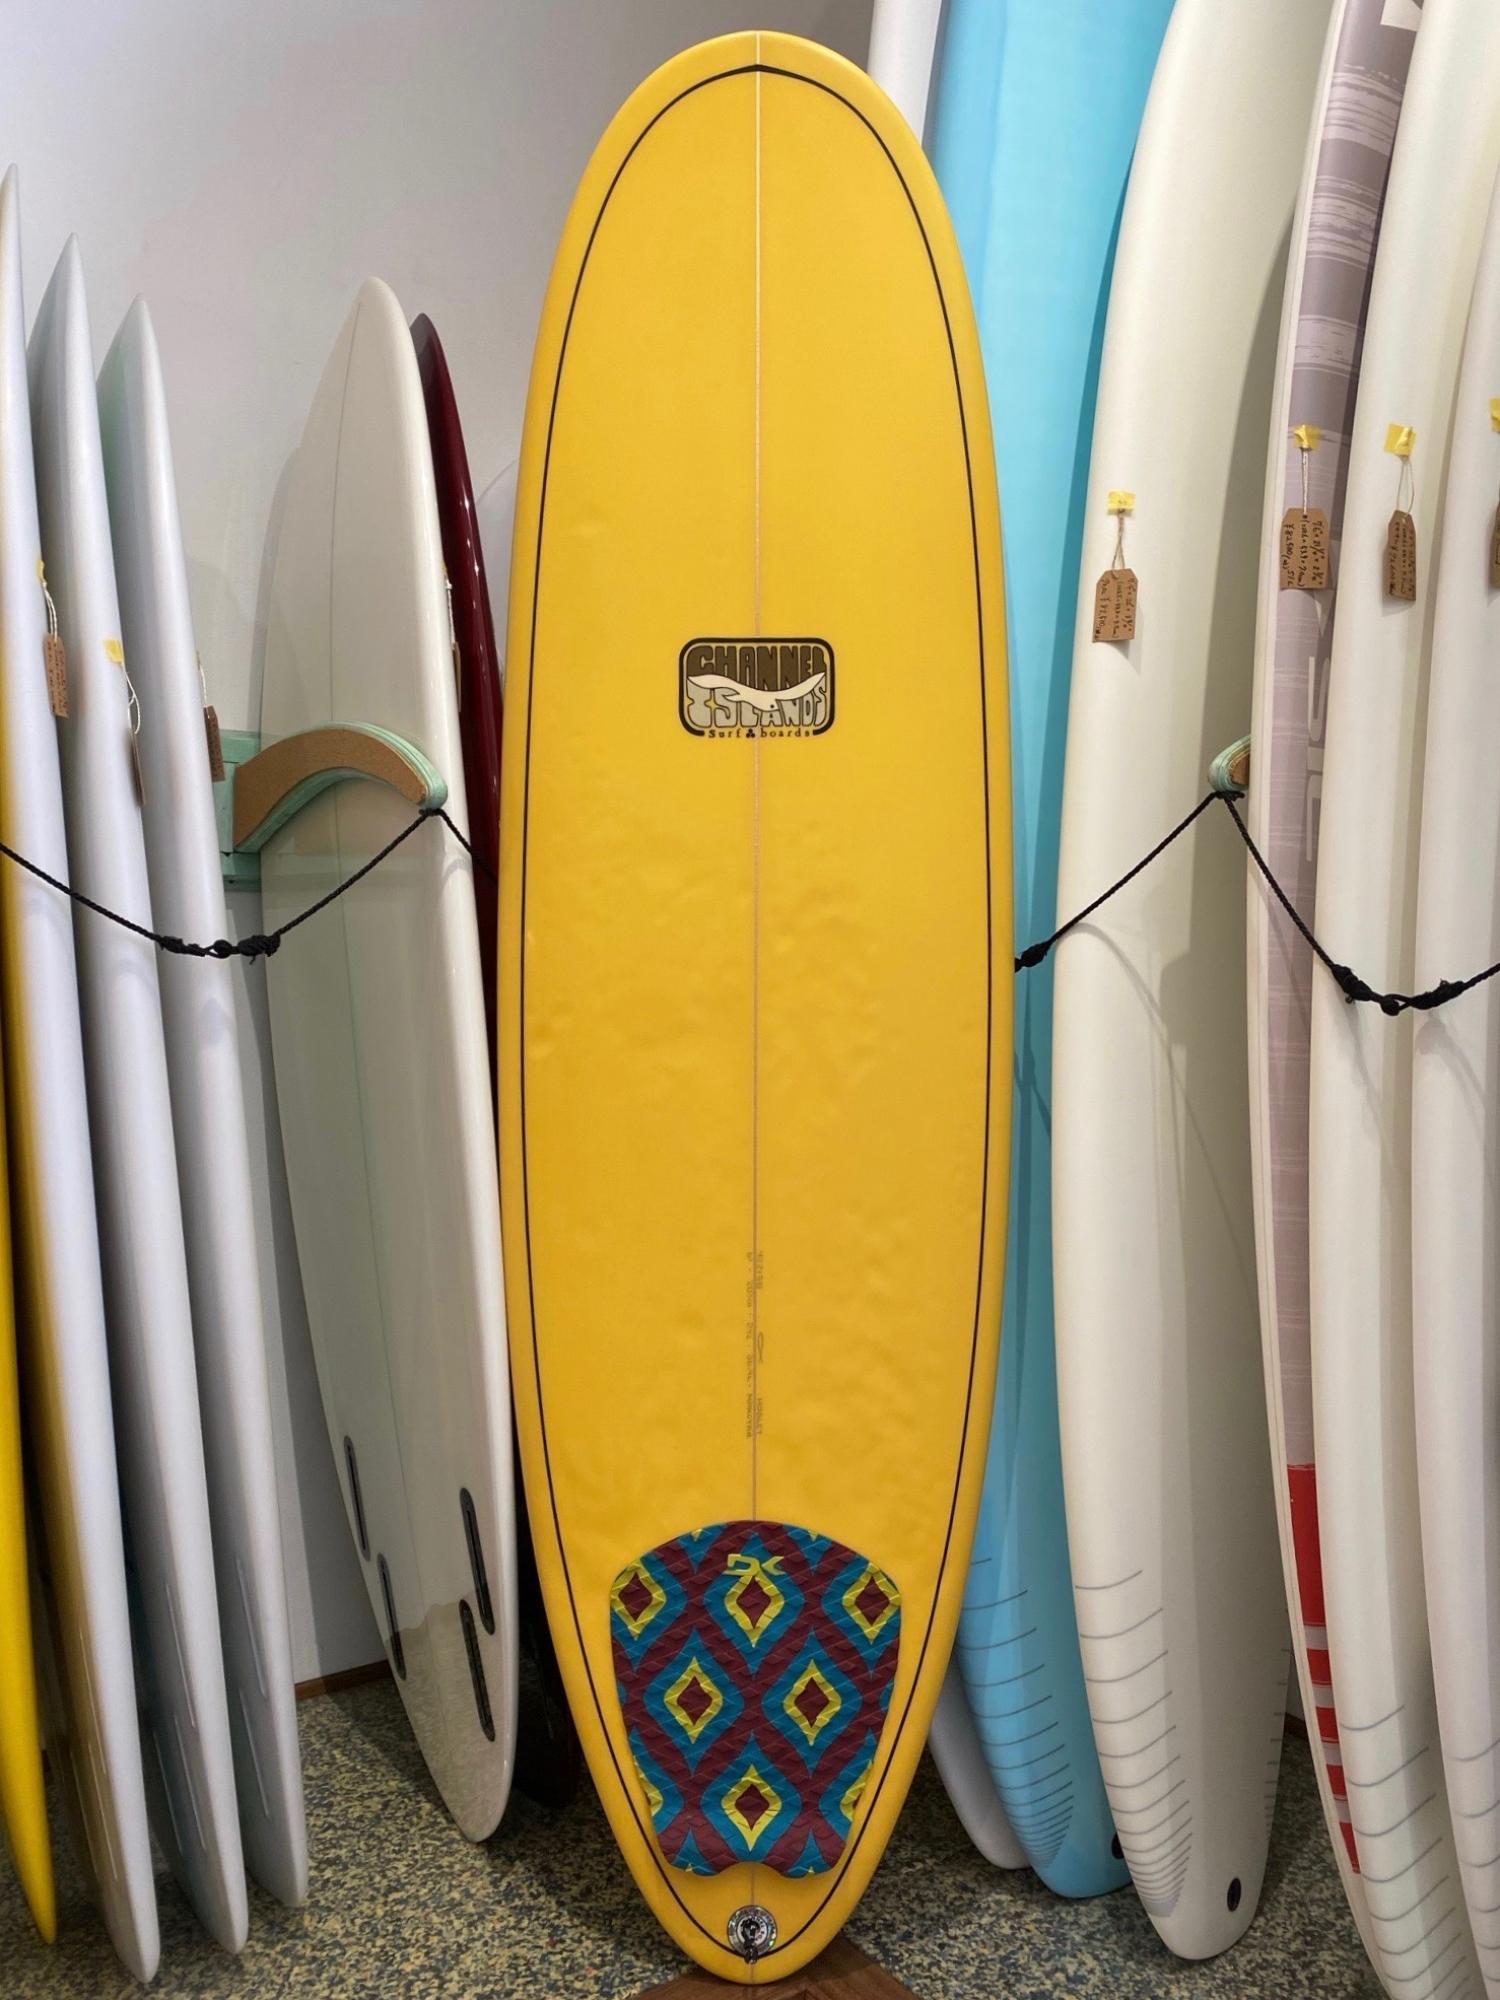 USED BOARDS (Channel Islands Hoglet 6.0)